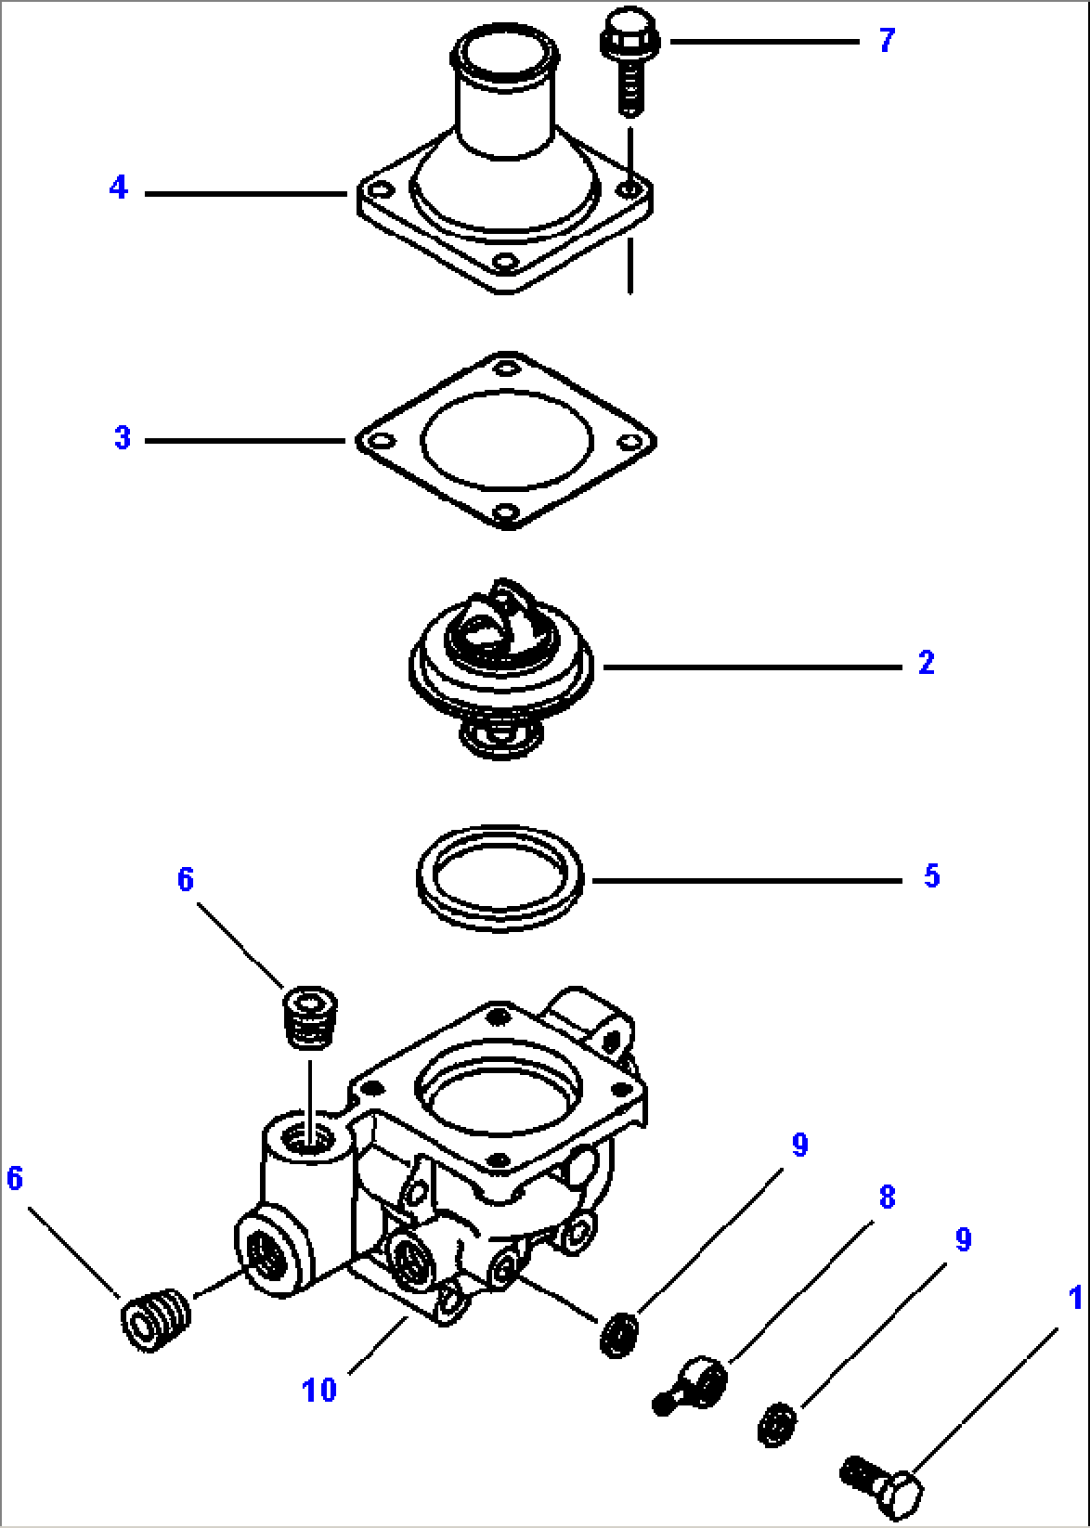 FIG. A0141-01A1 TIER II ENGINE - THERMOSTAT